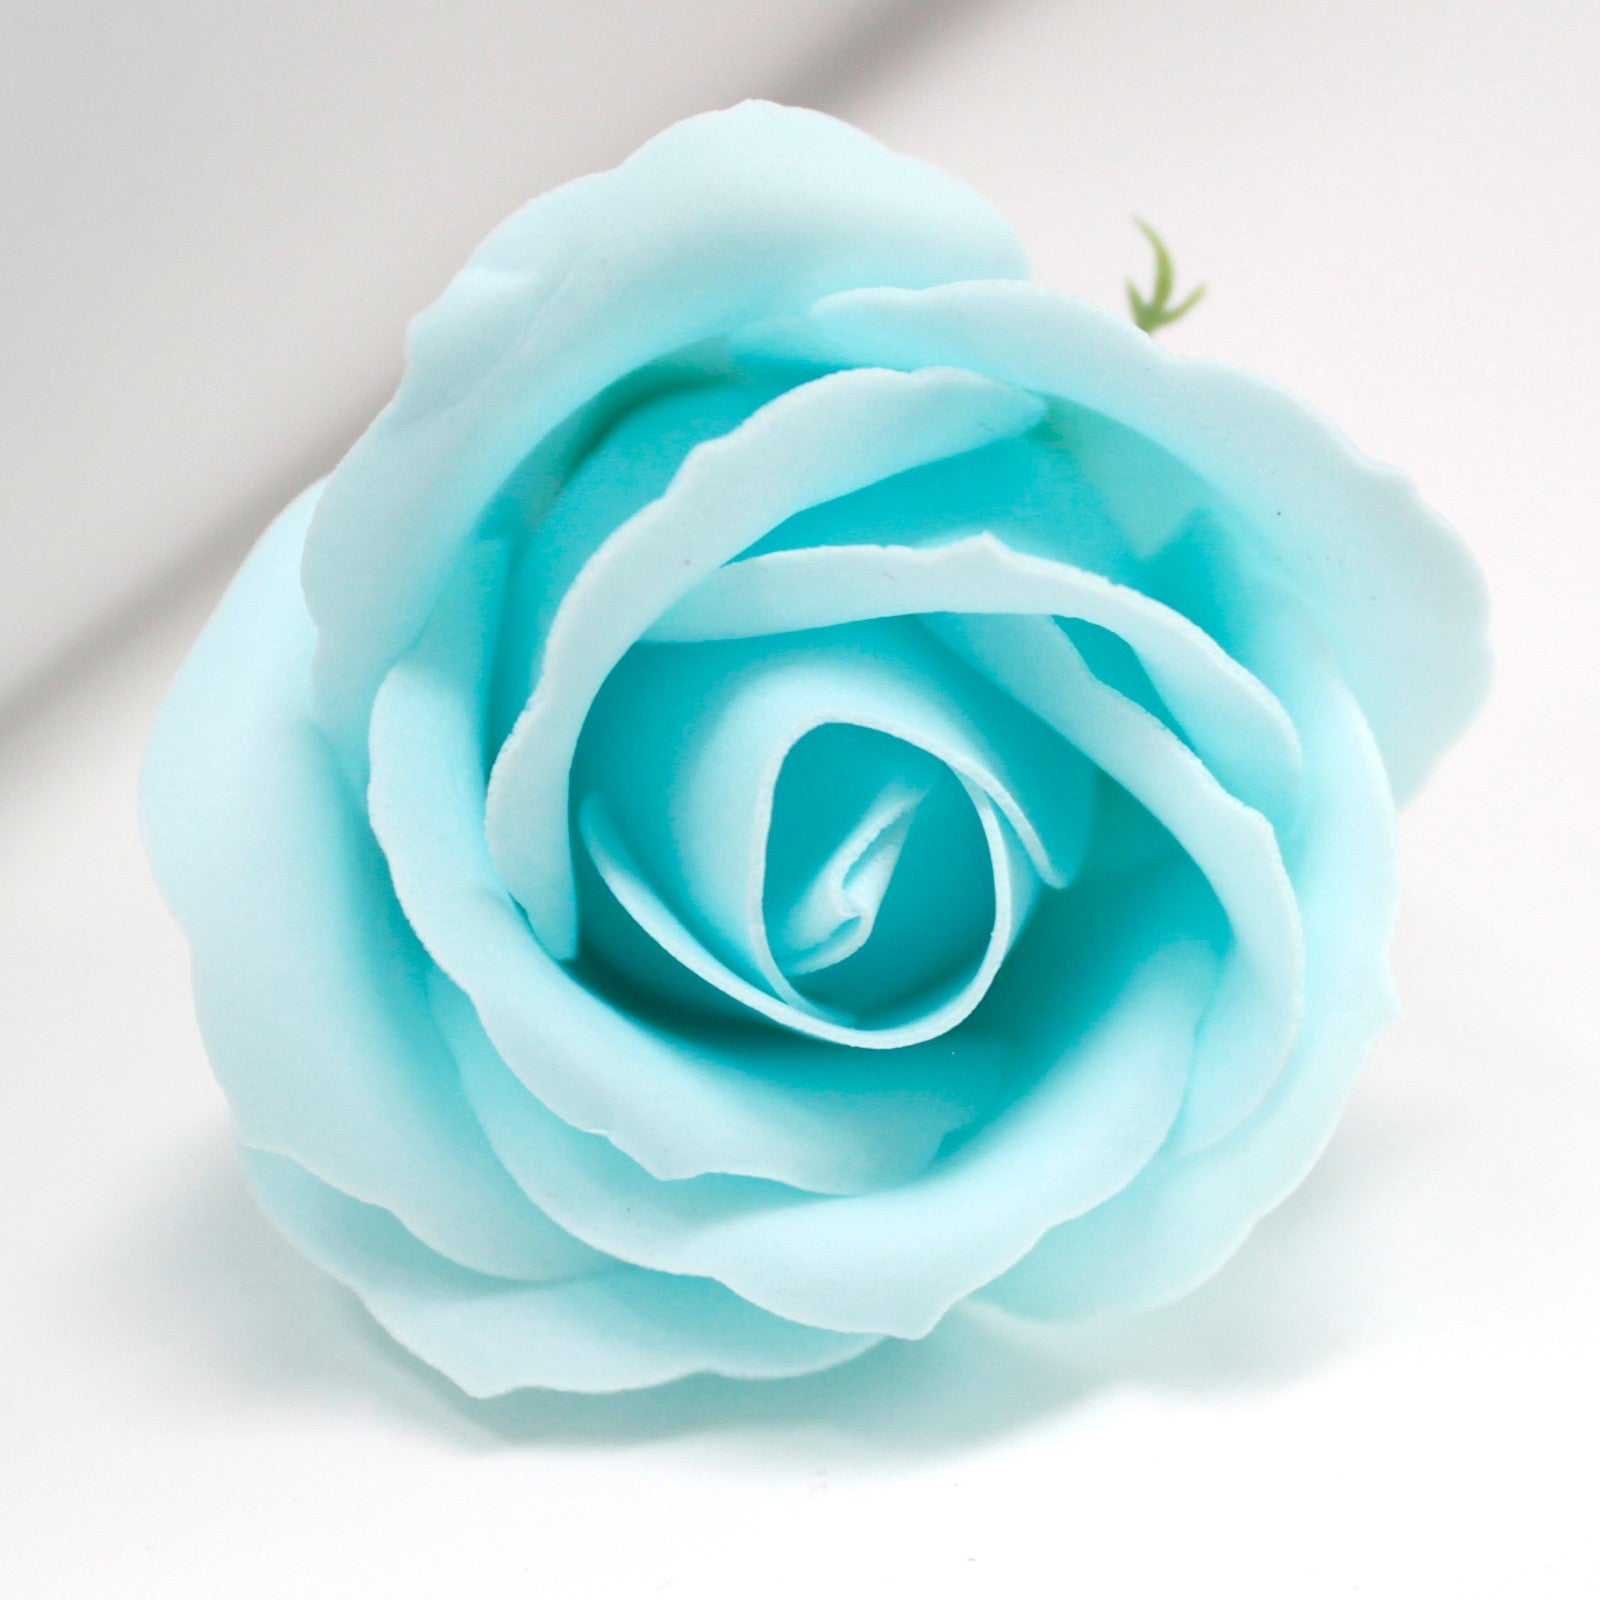 View Craft Soap Flowers Med Rose Baby Blue x 10 pcs information